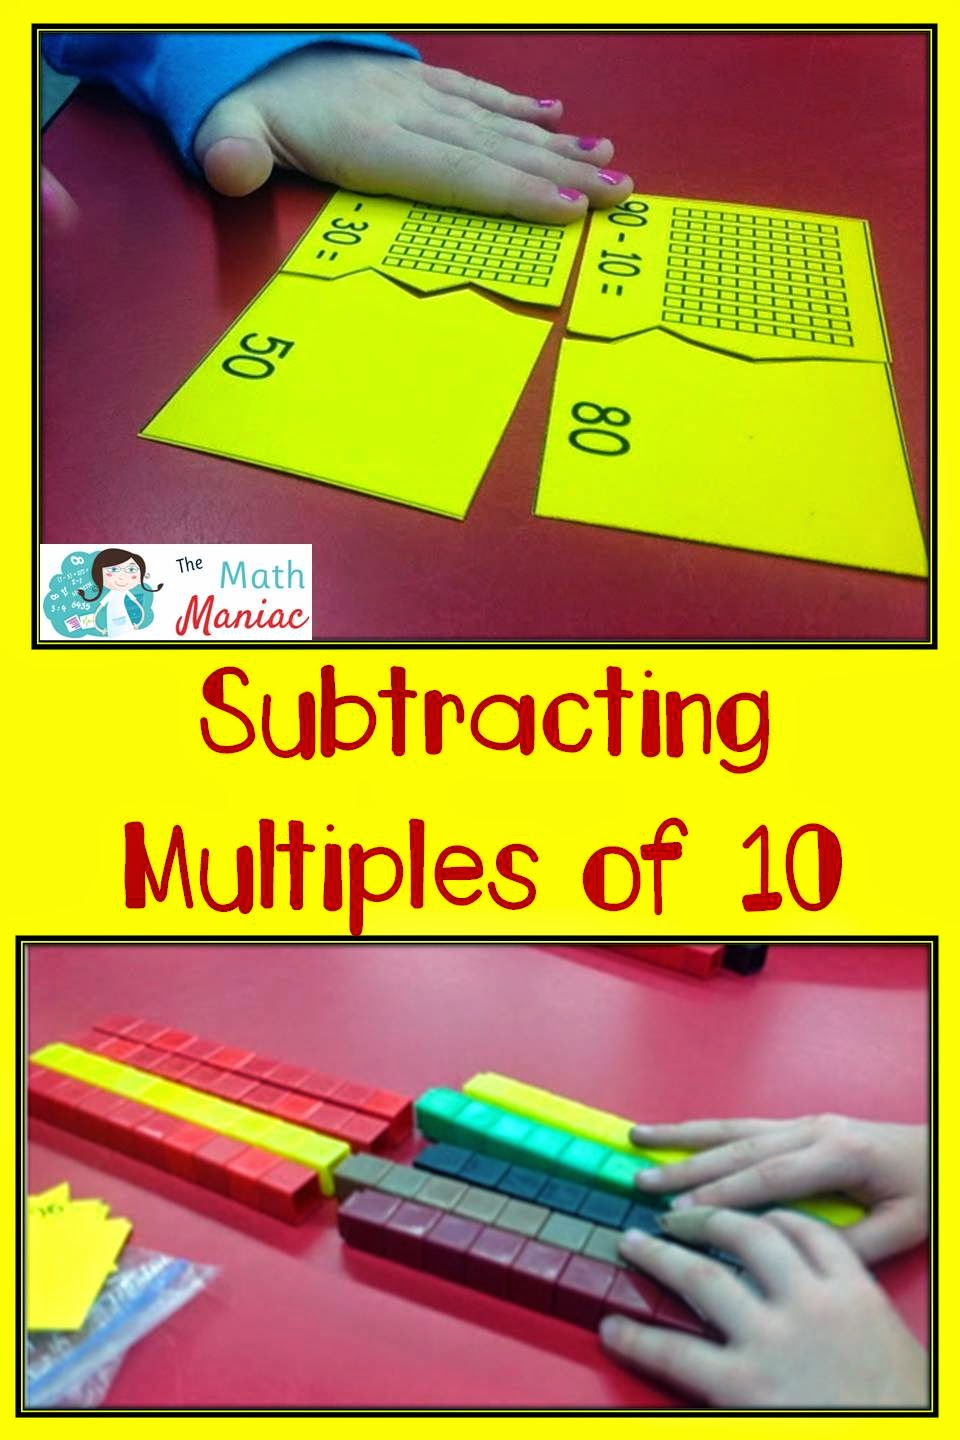 The Elementary Math Maniac: Subtracting Multiples of 10